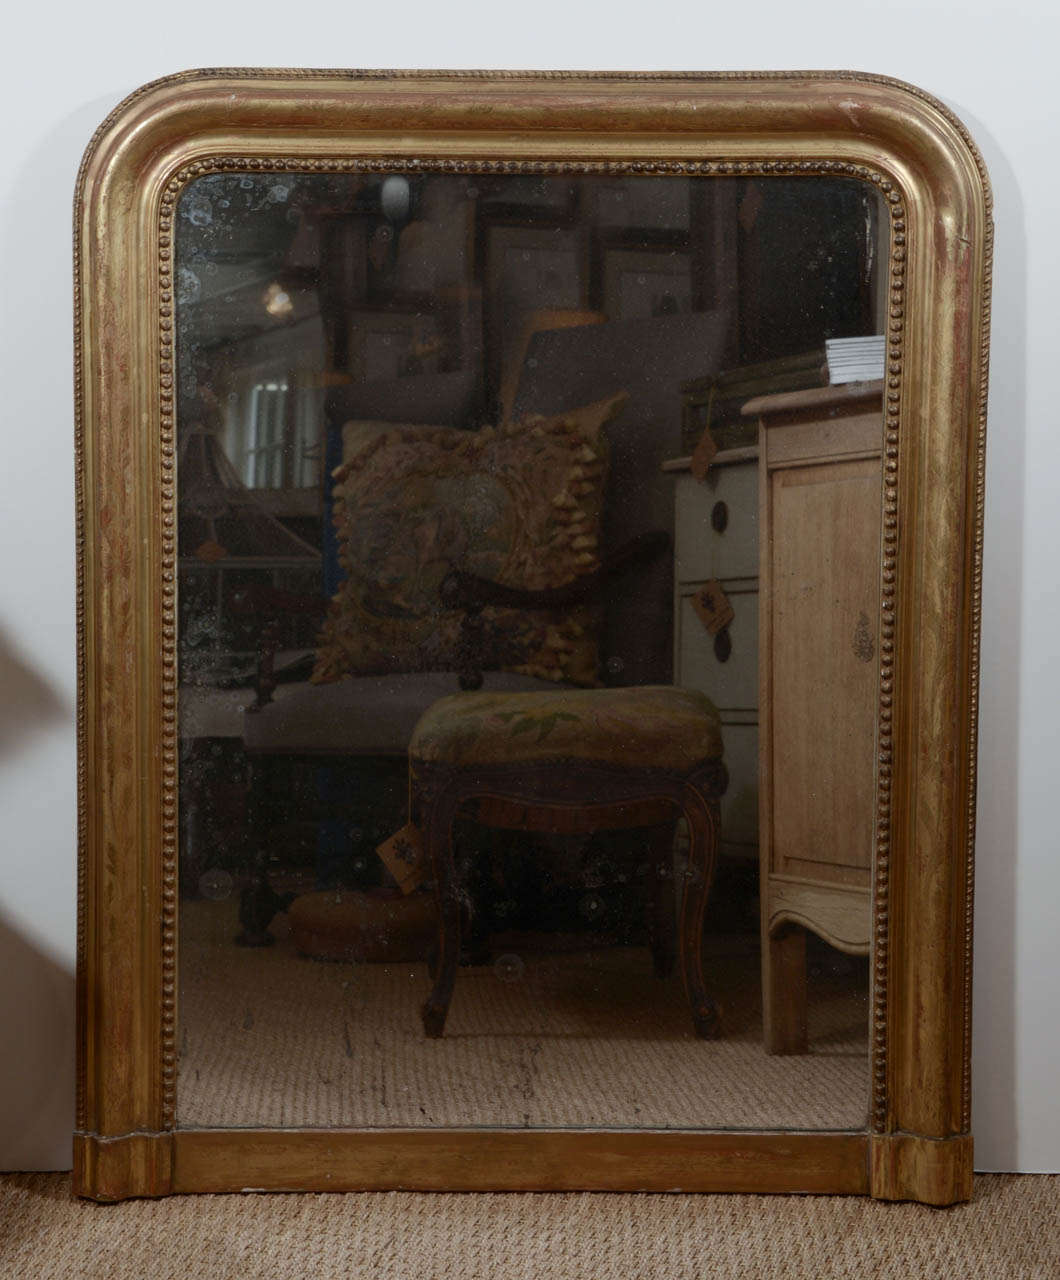 This lovely 19th century Louis Phillip mirror is sure to brighten any space. Use it in a bedroom, bathroom or dining room to add a touch of old world glamor. The carved wood frame has patinated gilding, 